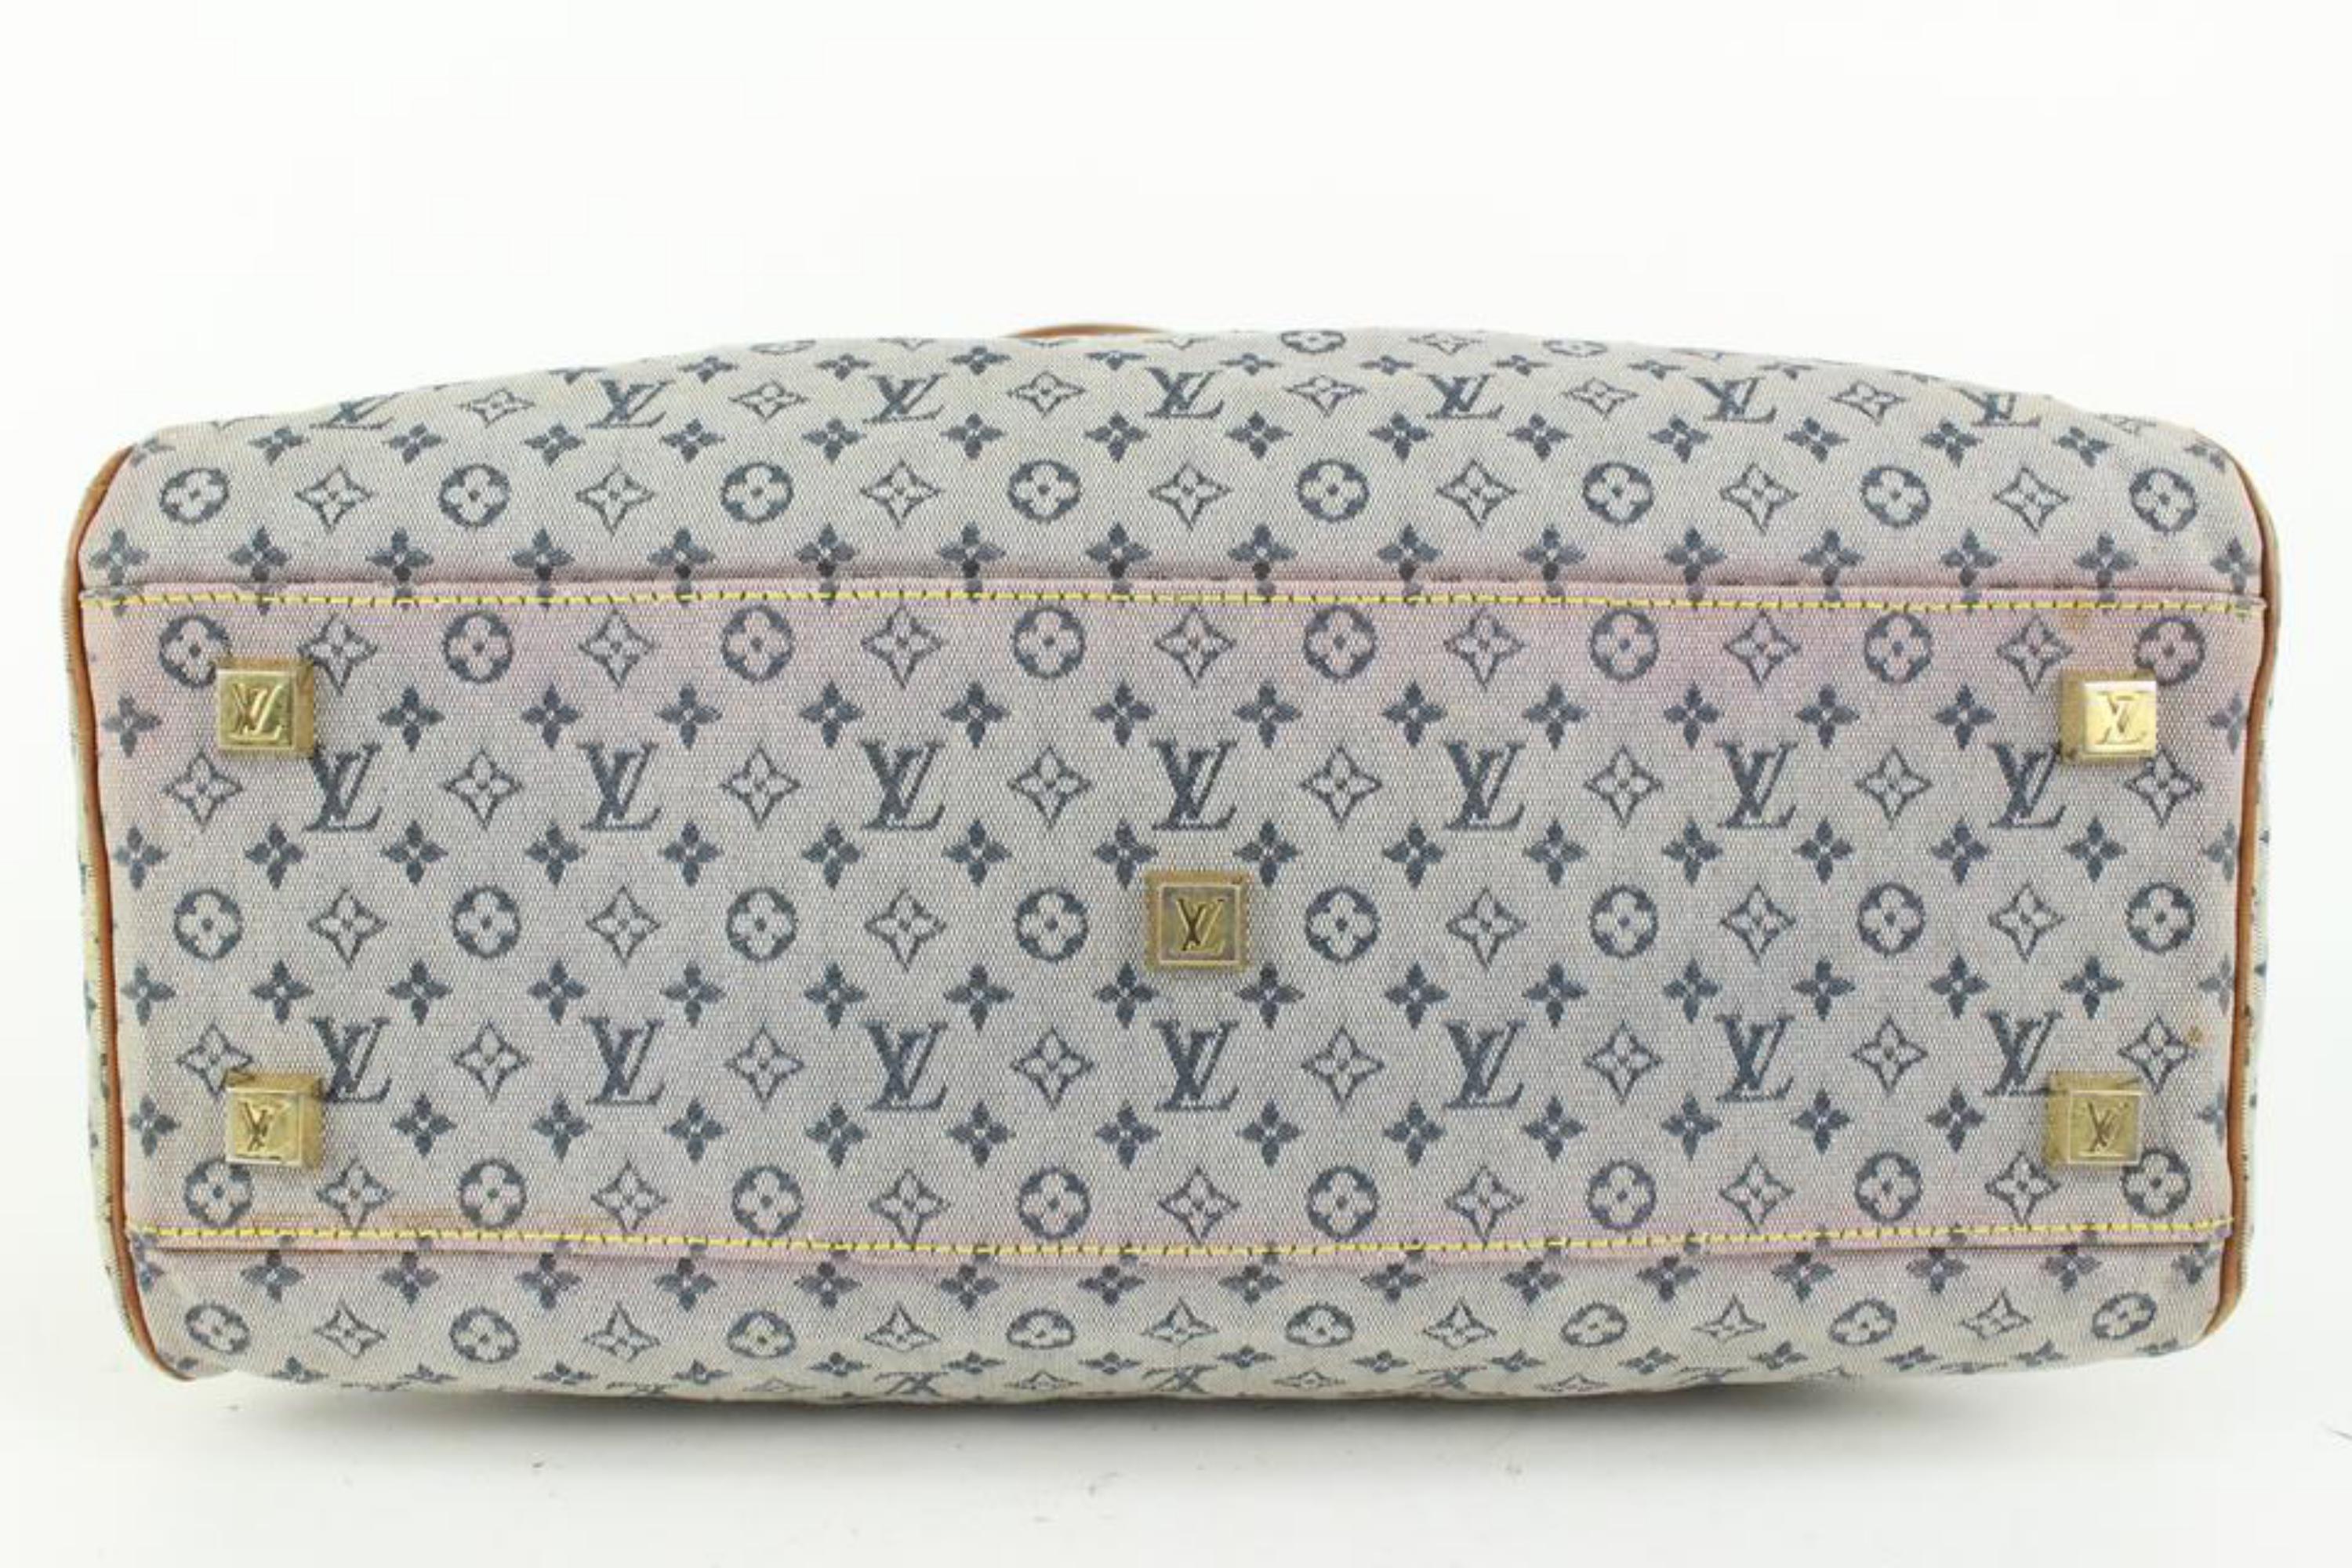 Louis Vuitton Navy x Grey Monogram Mini Lin Marie Boston Bag 1LV112 In Good Condition For Sale In Dix hills, NY